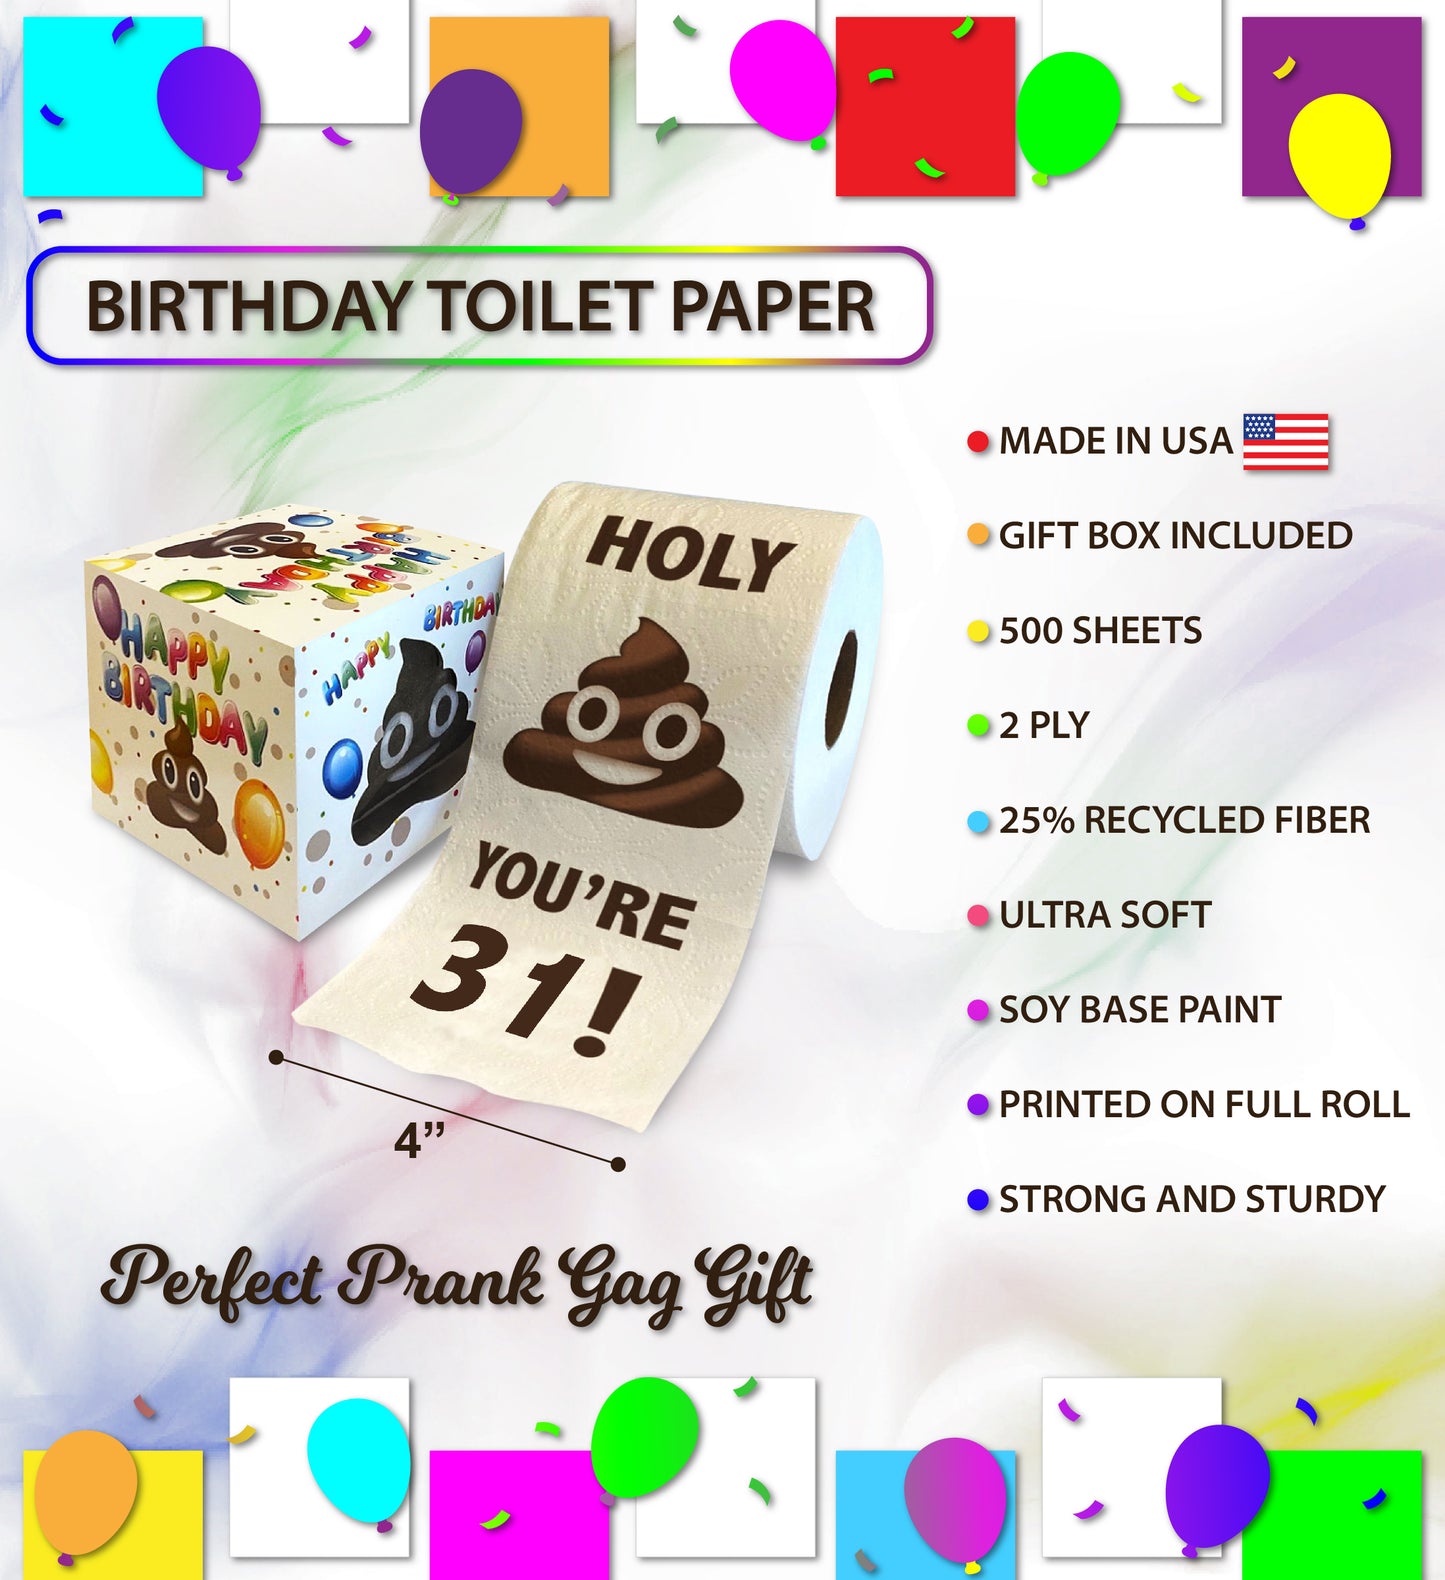 Printed TP Holy Poop You're 31 Funny Toilet Paper Roll Birthday Party Gag Gift